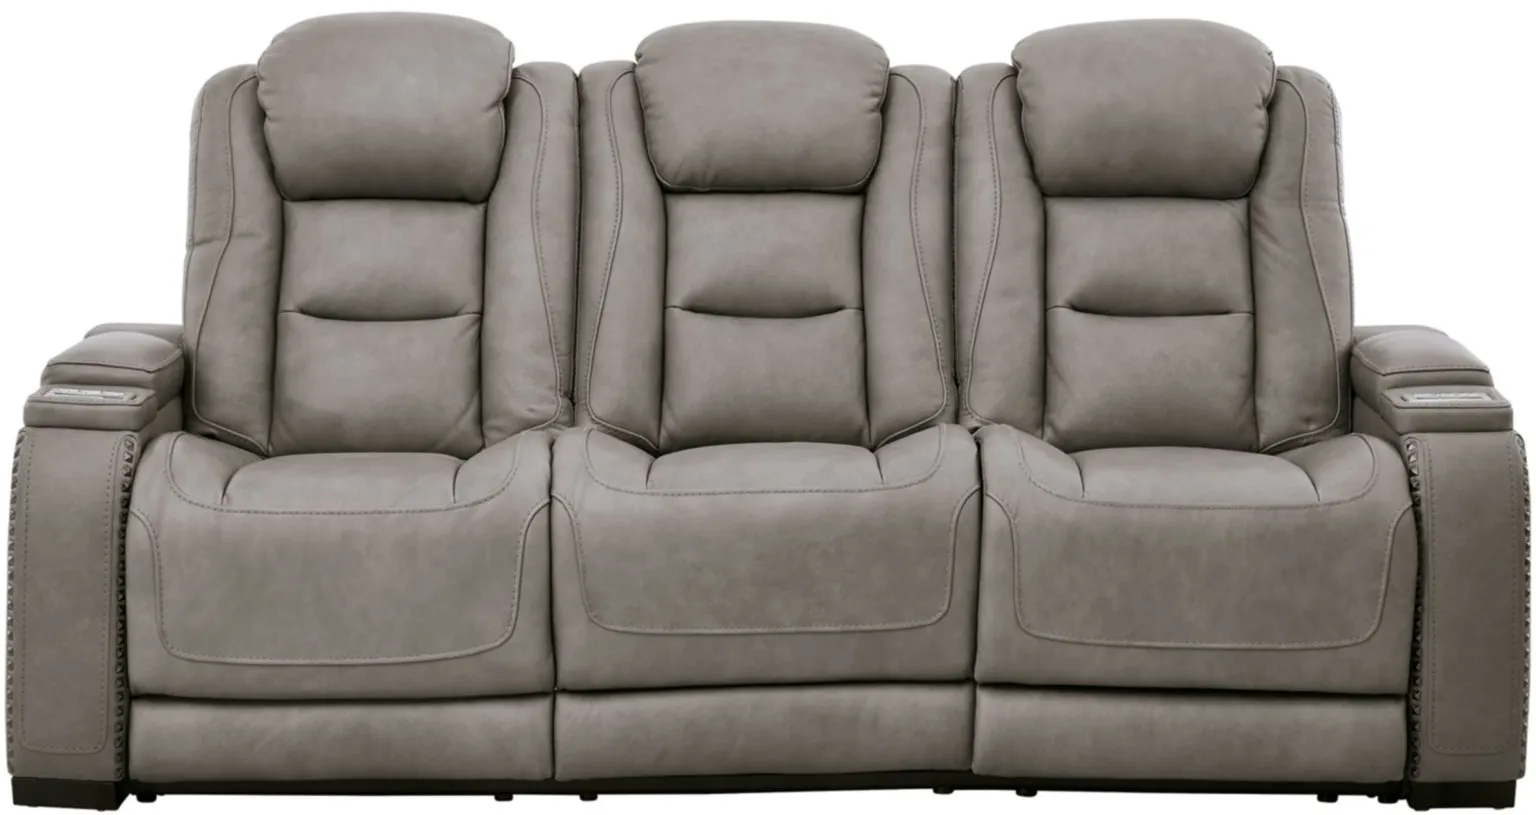 The Man-Den Power Recliner Sofa with Adjustable Headrest in Gray by Ashley Furniture